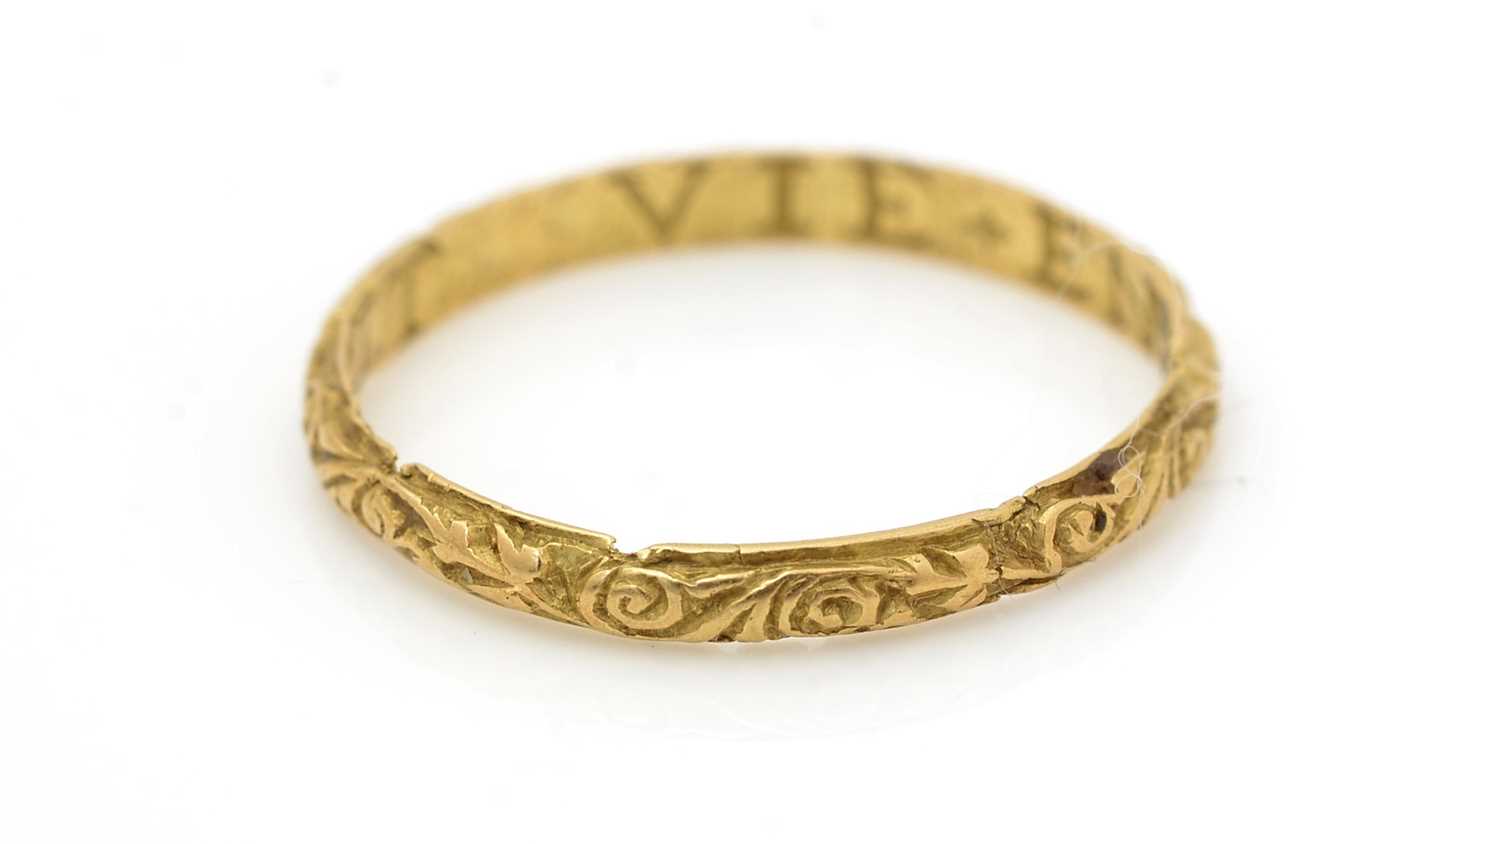 Lot 494 - An antique gold posy ring, c.16th Century